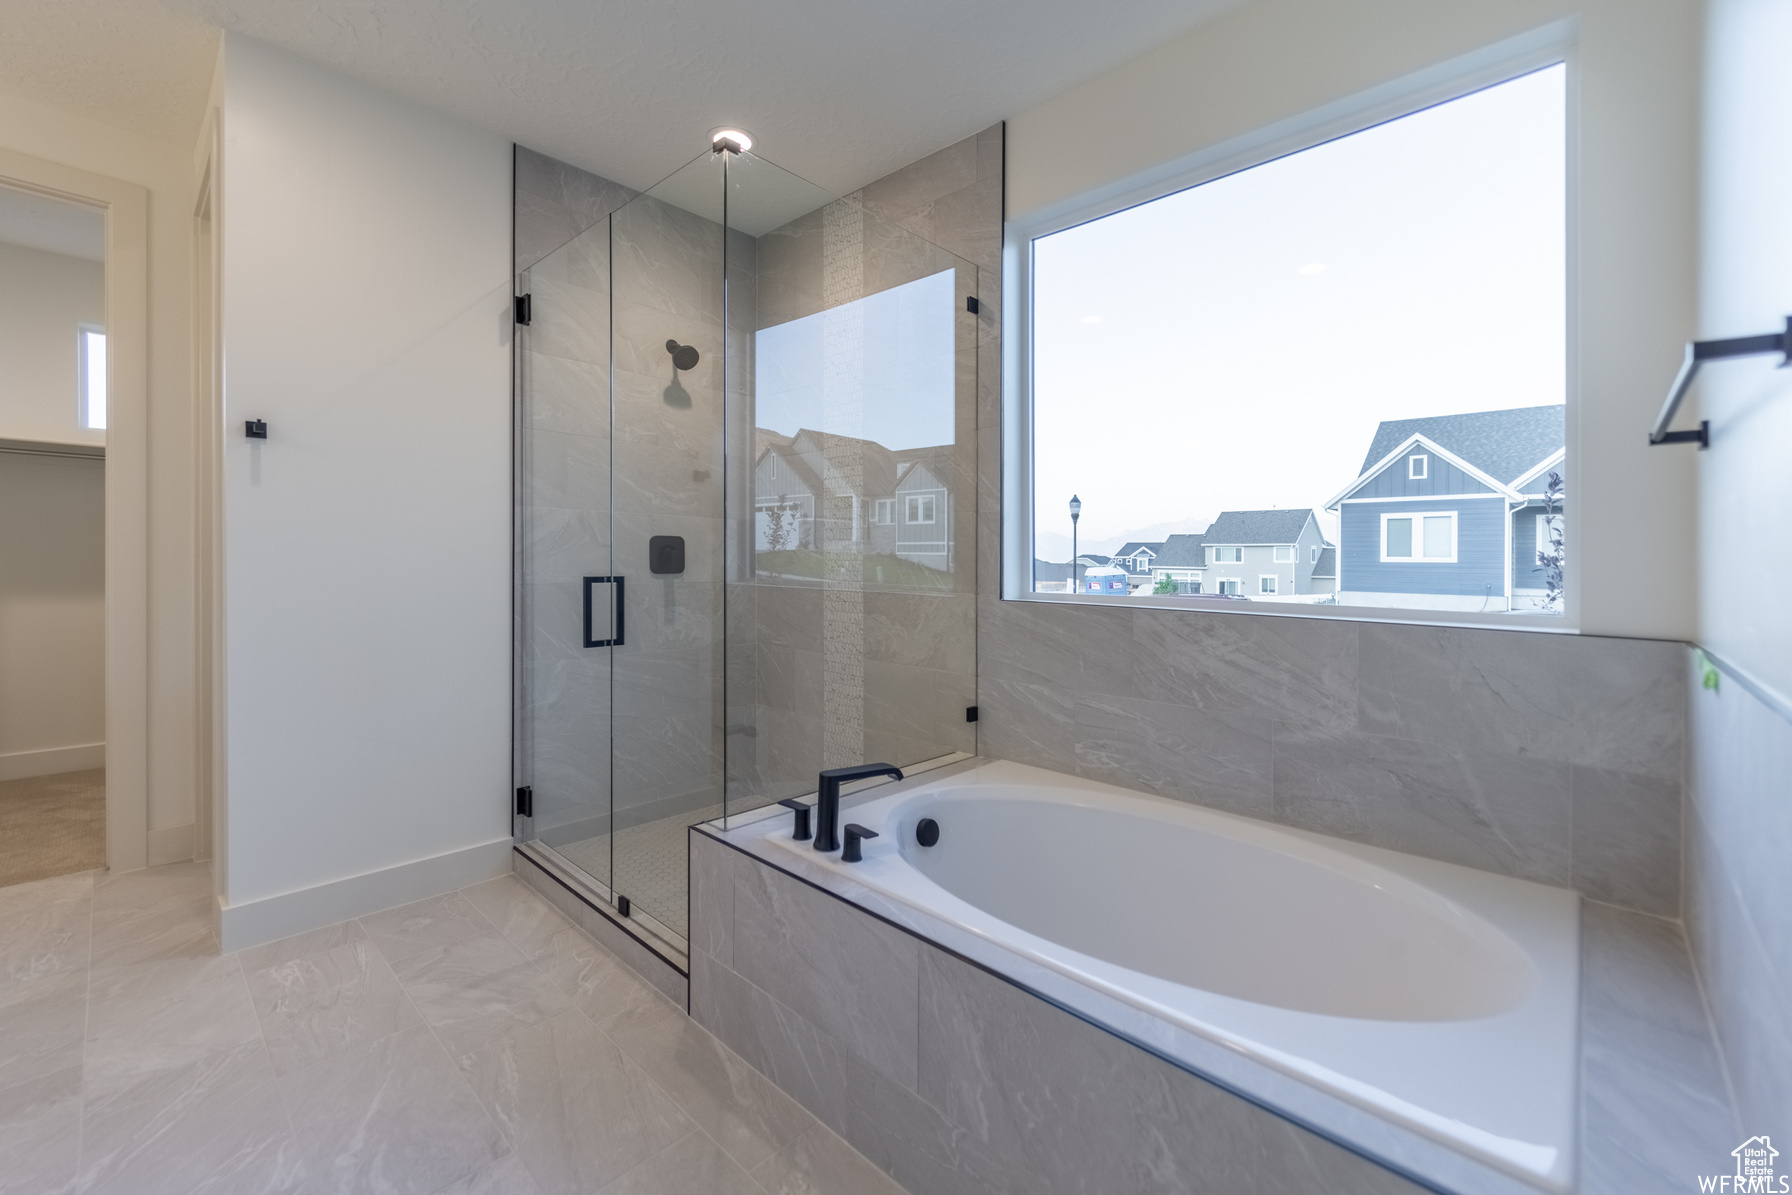 Full Euro-Glass shower with built-in garden style tub, included in base price!